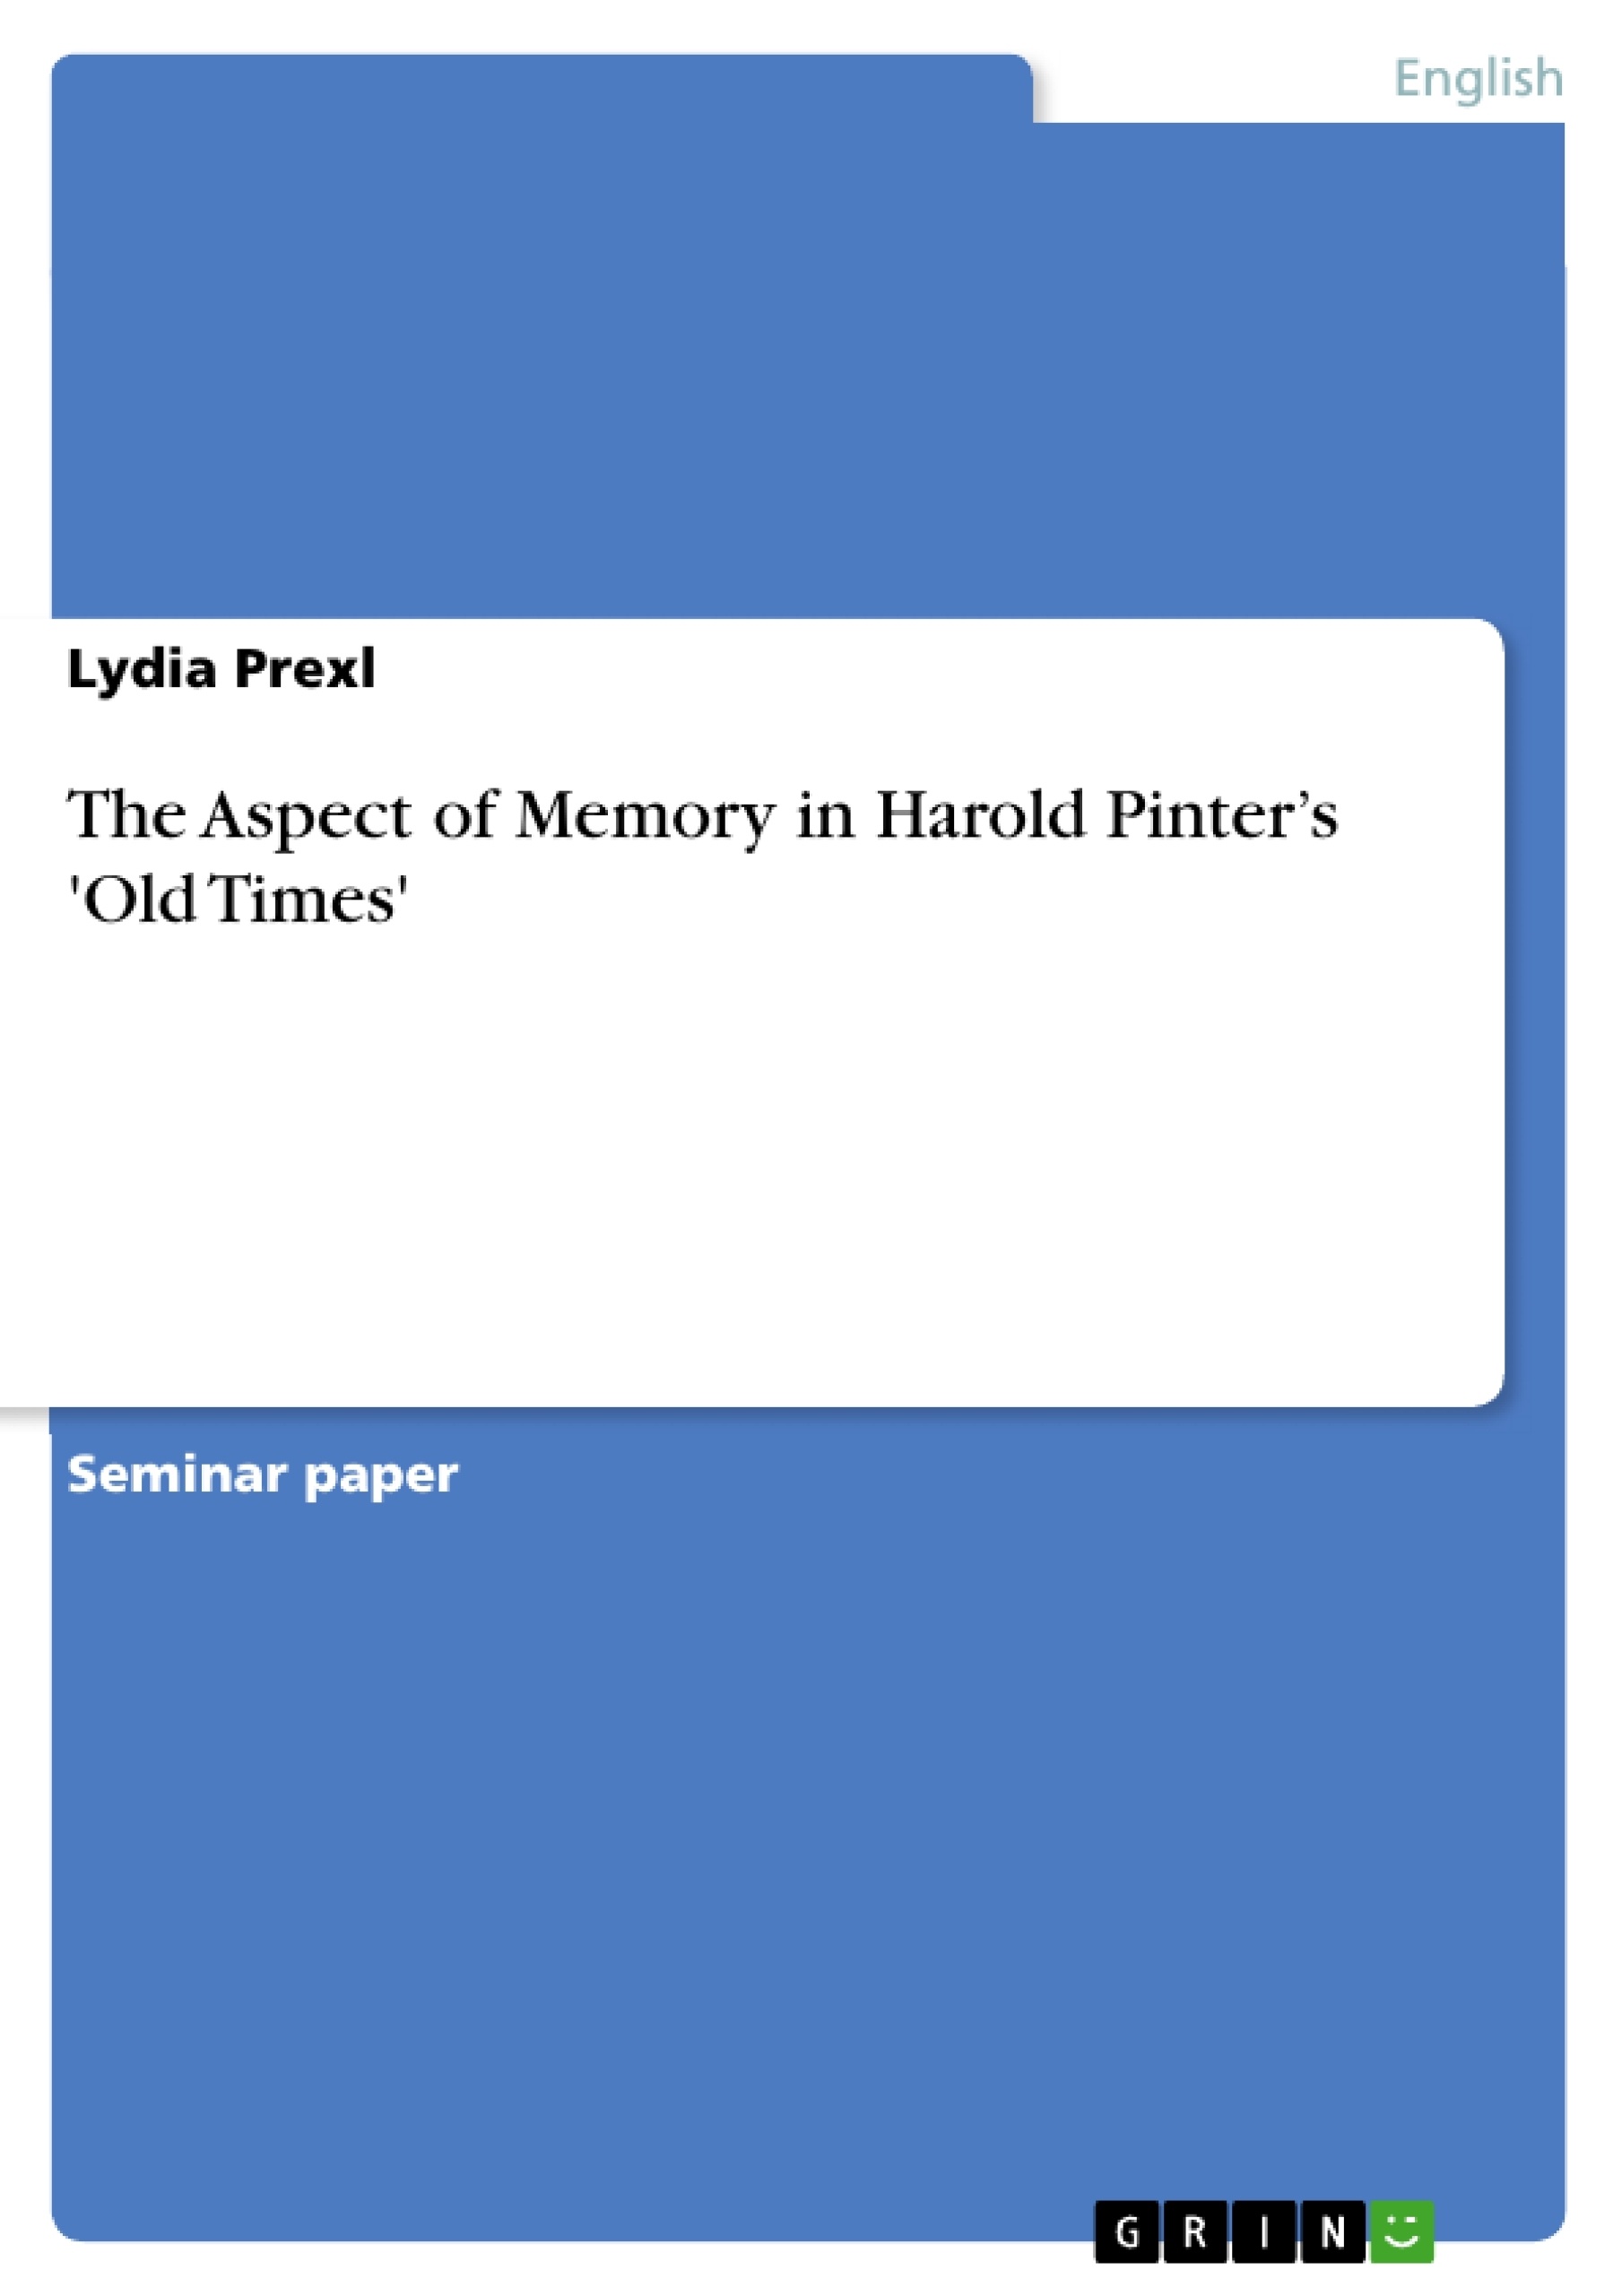 Titre: The Aspect of Memory in Harold Pinter’s 'Old Times'